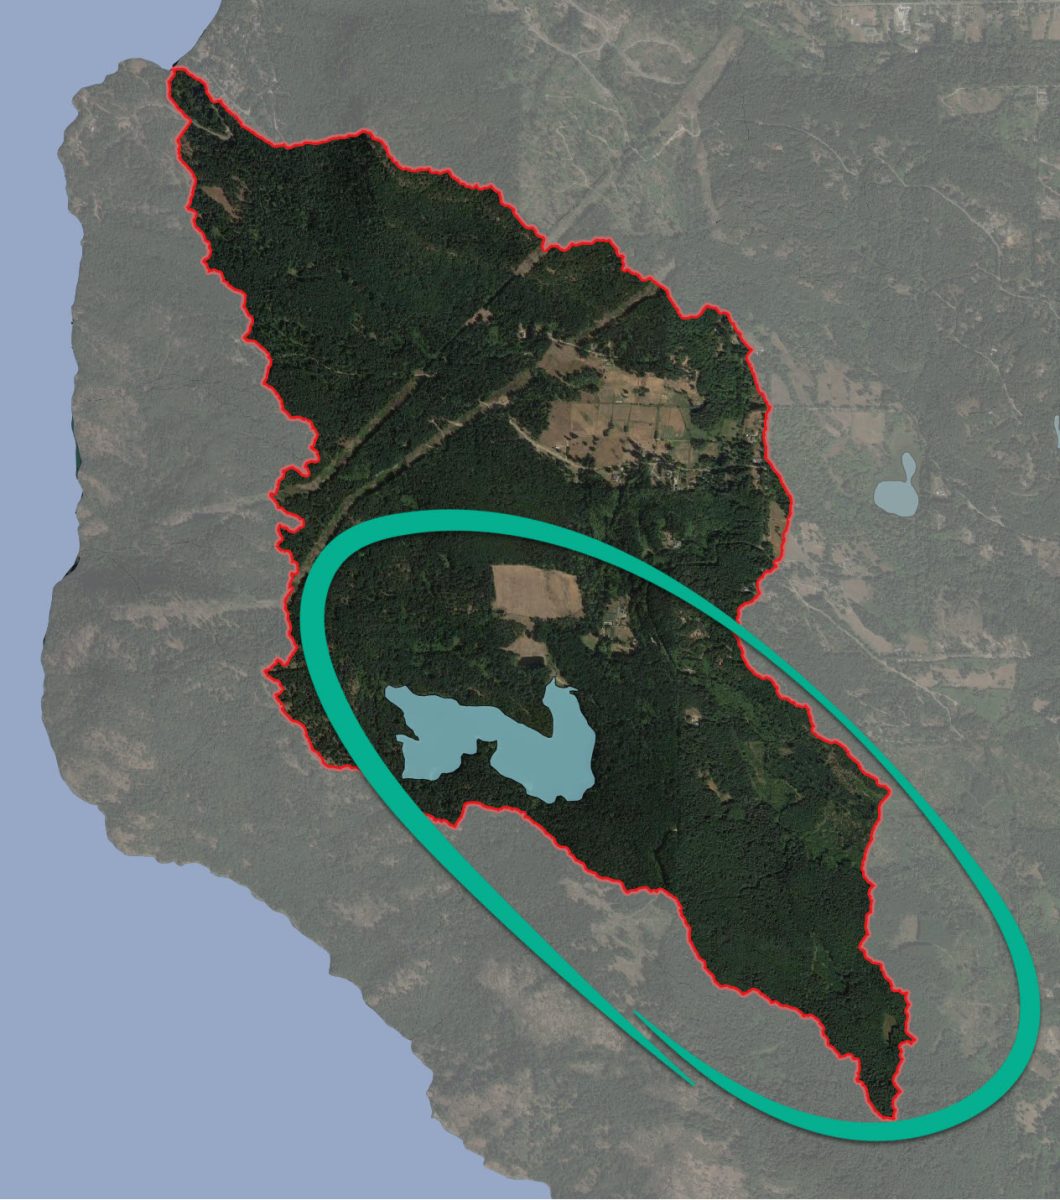 Maxwell Creek Watershed highlighted in red, with green circle indicating the study area of the Maxwell Creek Watershed Project.